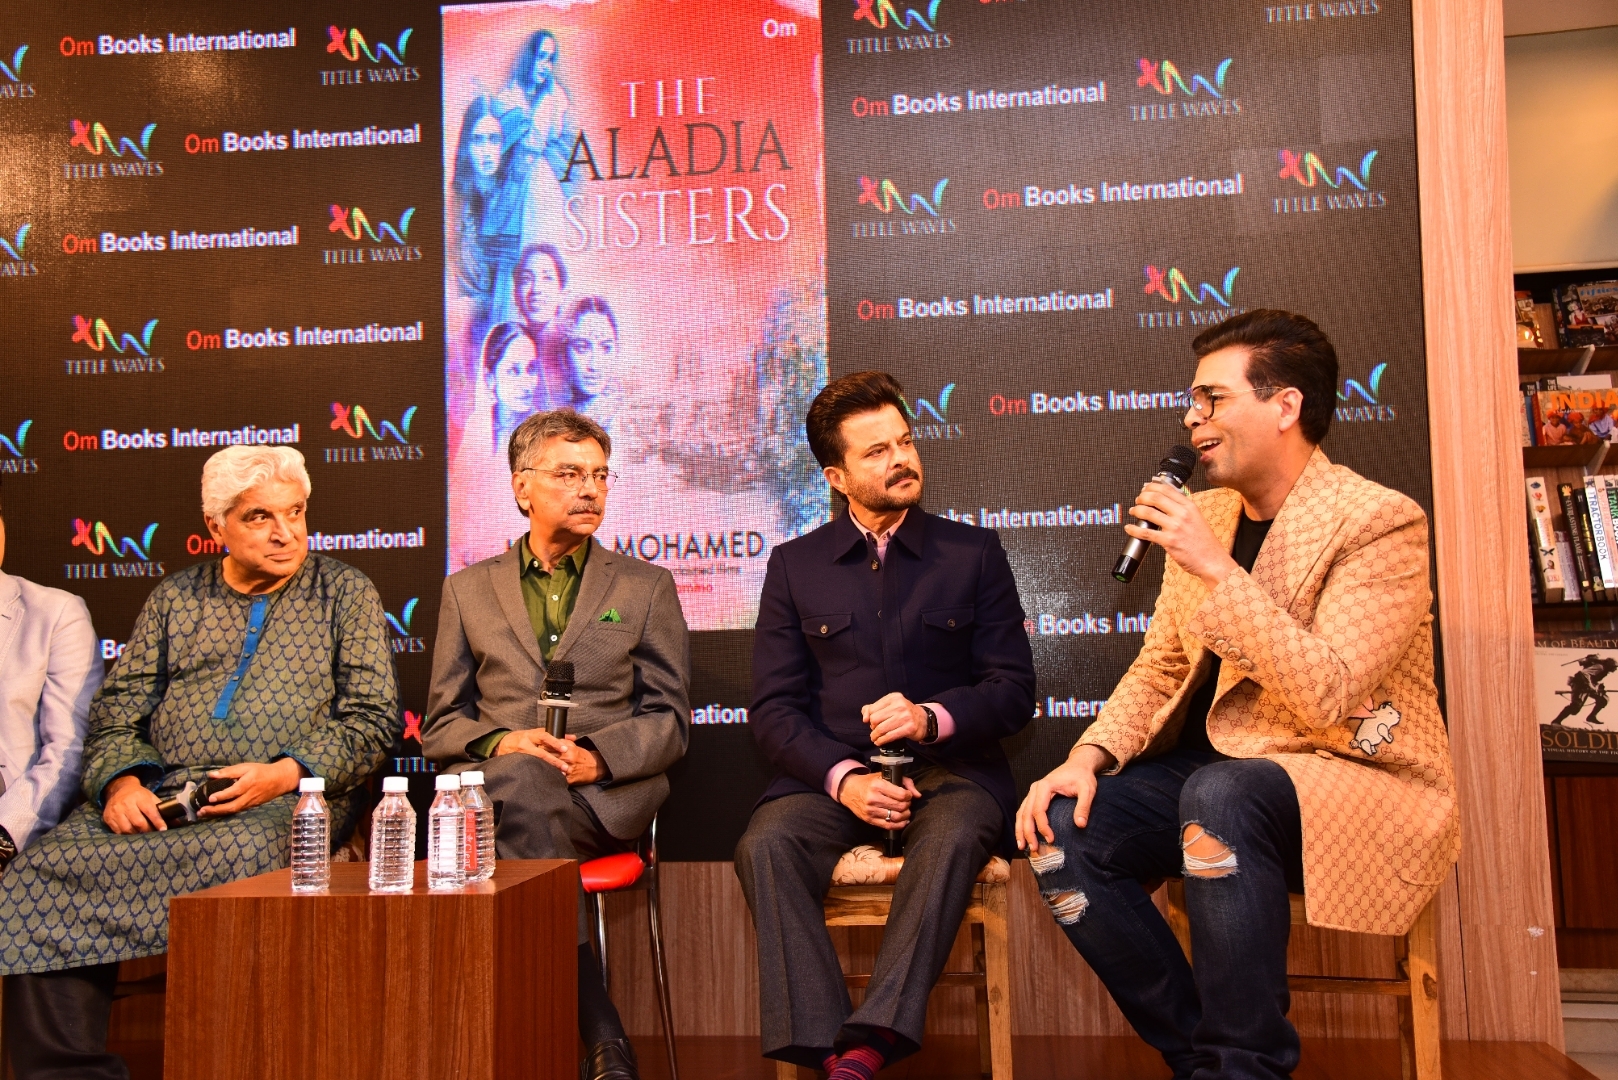 Journalist and author Khalid Mohamed with filmmaker Karan Johar, poet, lyricist and screenwriter Javed Akhtar and actor Anil Kapoor at the launch of his book "The Aladia Sisters" in Mumbai on Oct 7, 2019. (Photo: IANS)